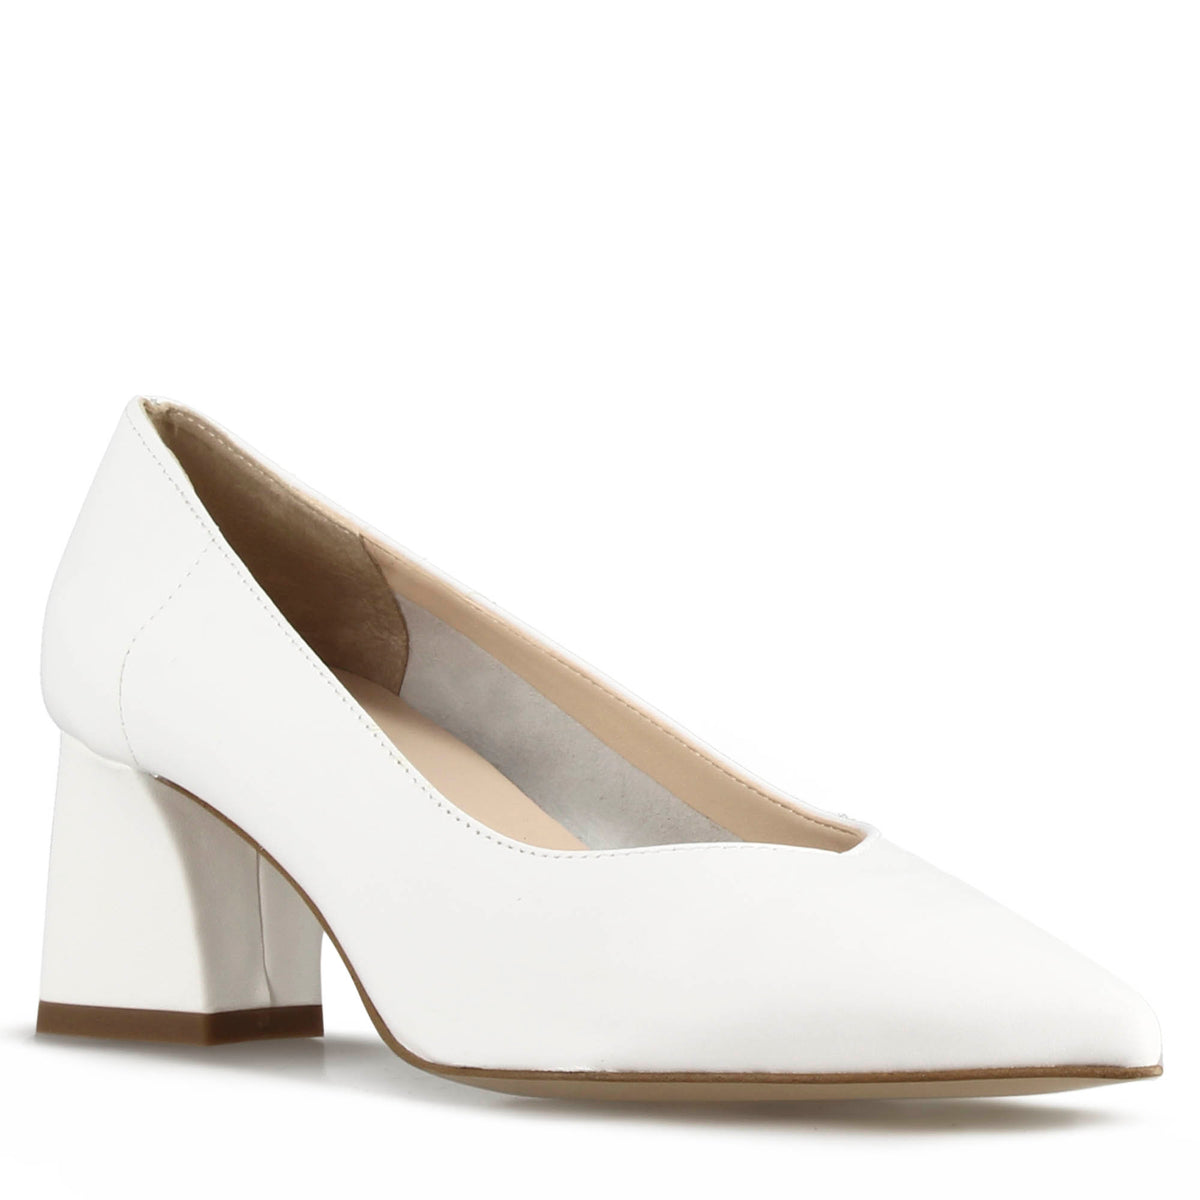 Women's pumps in white leather with medium heel